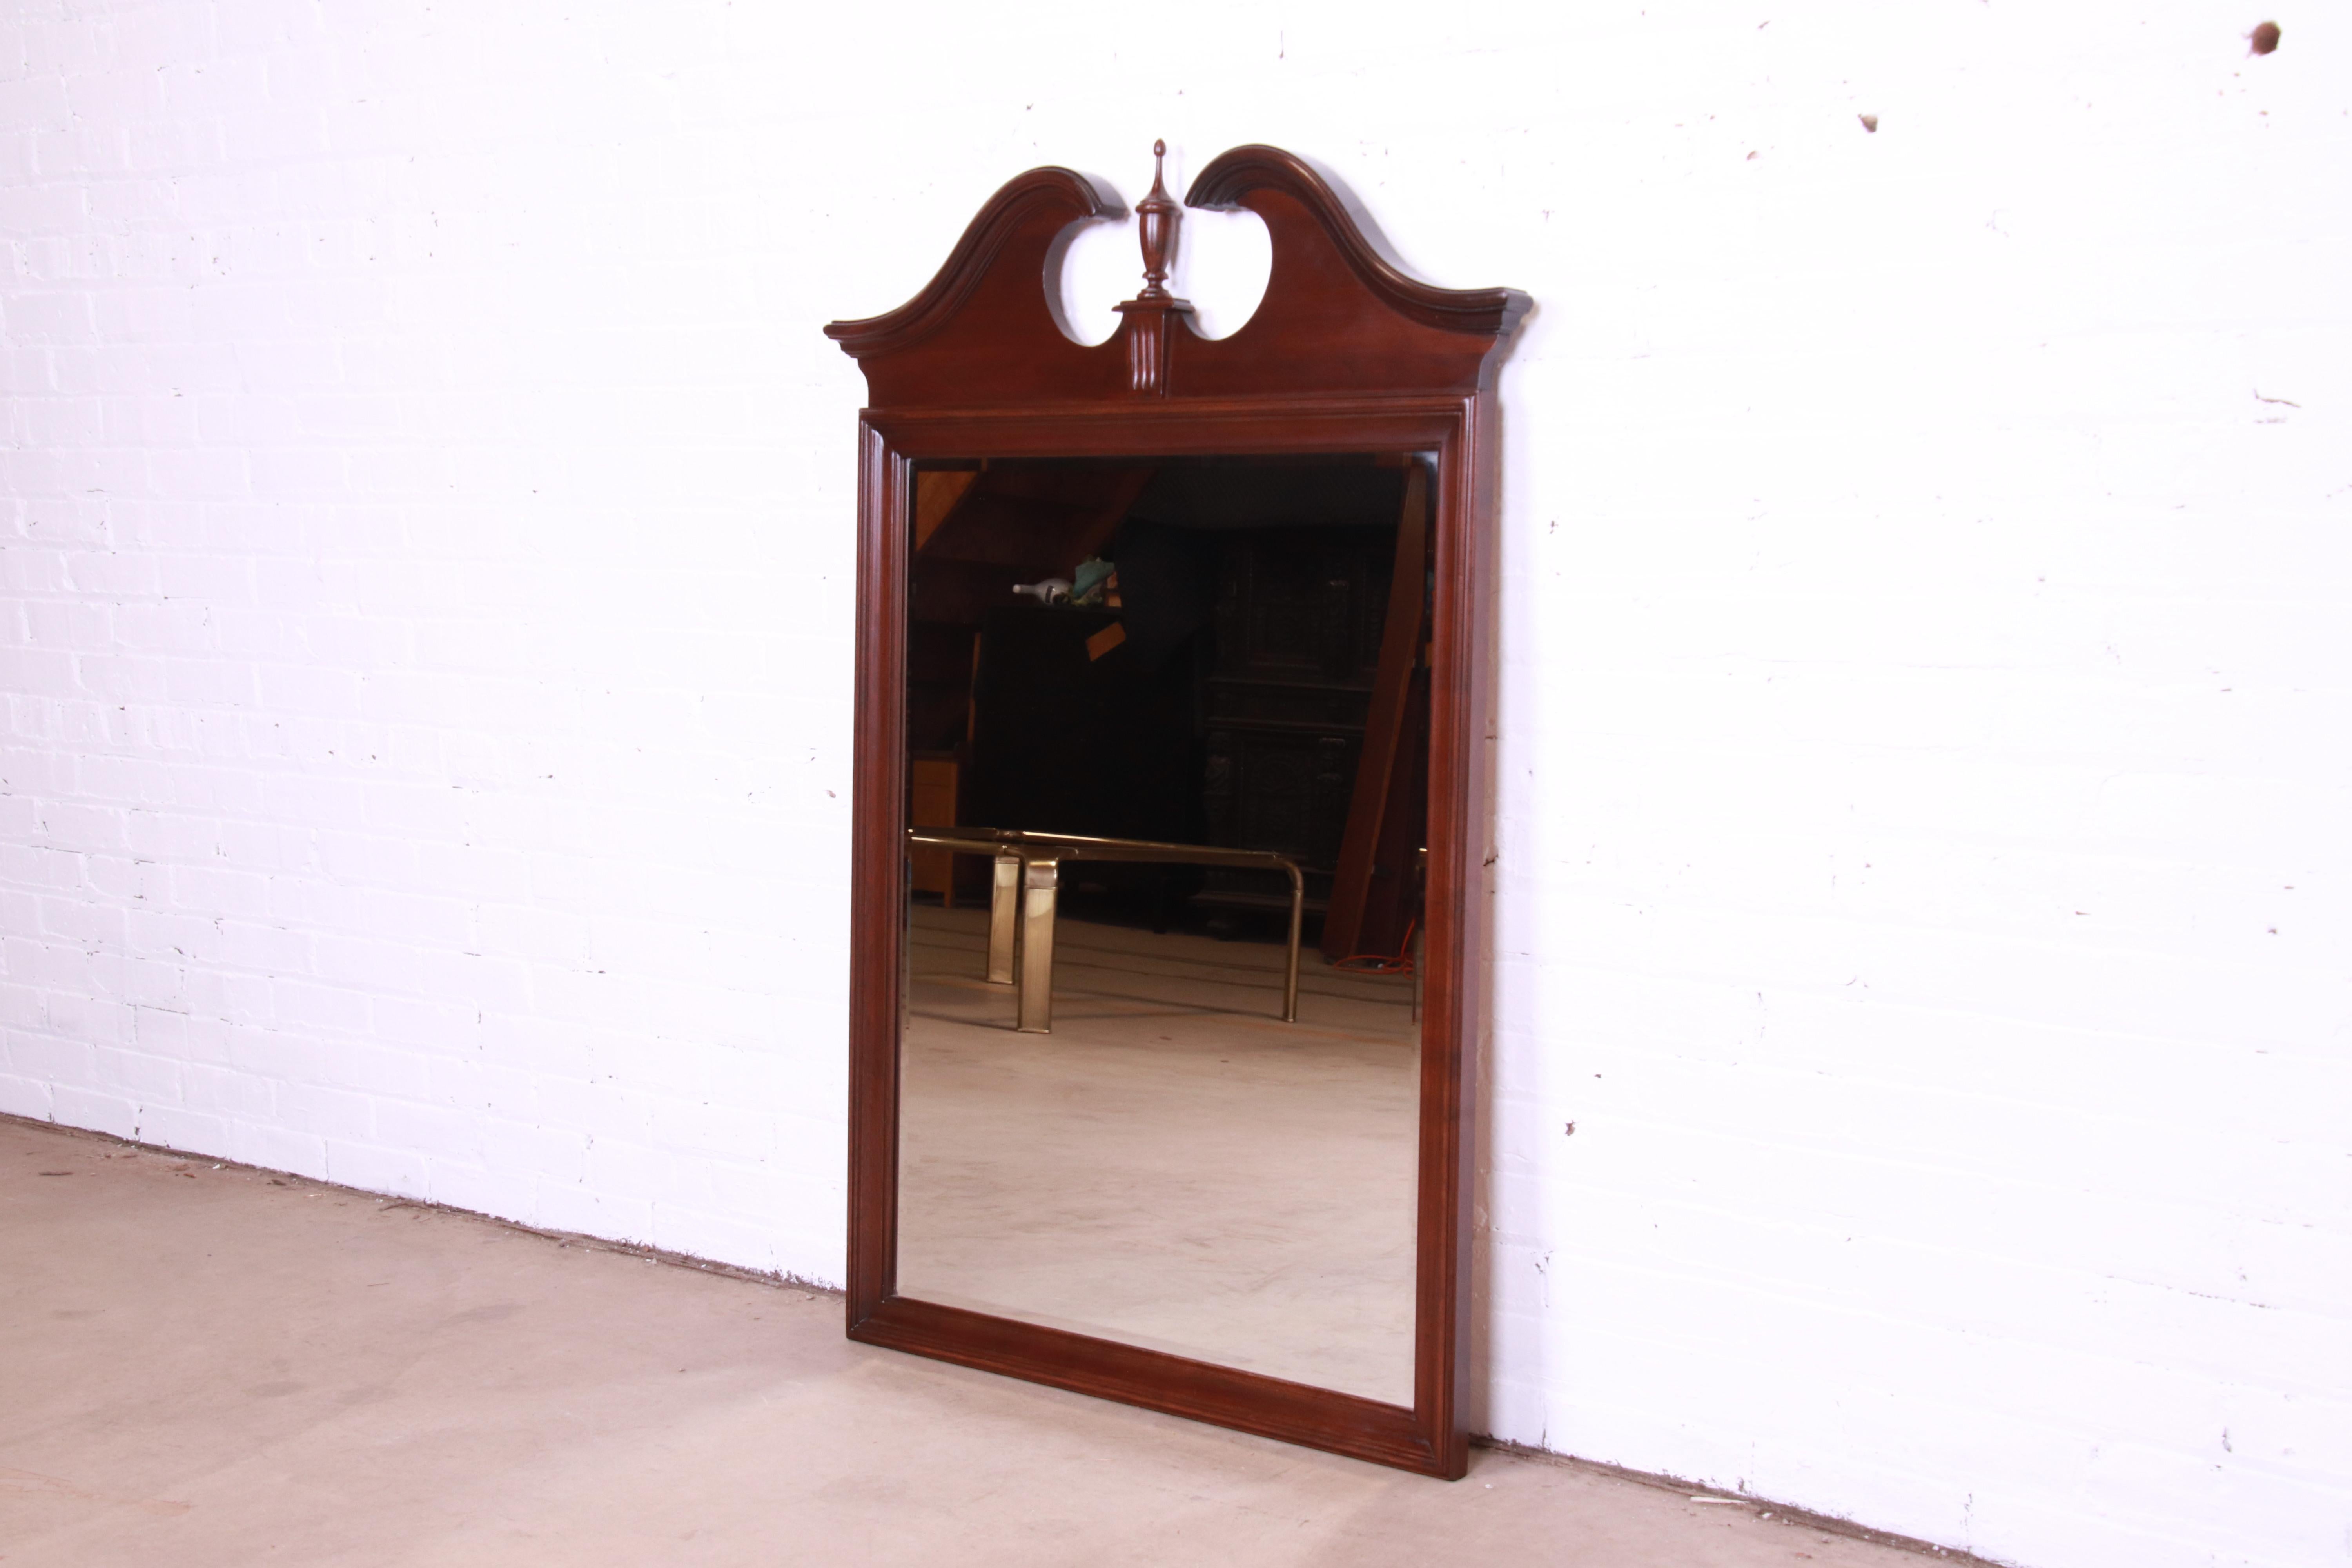 A gorgeous Georgian or Chippendale style carved mahogany framed wall mirror

USA, 1990s

Measures: 34.25